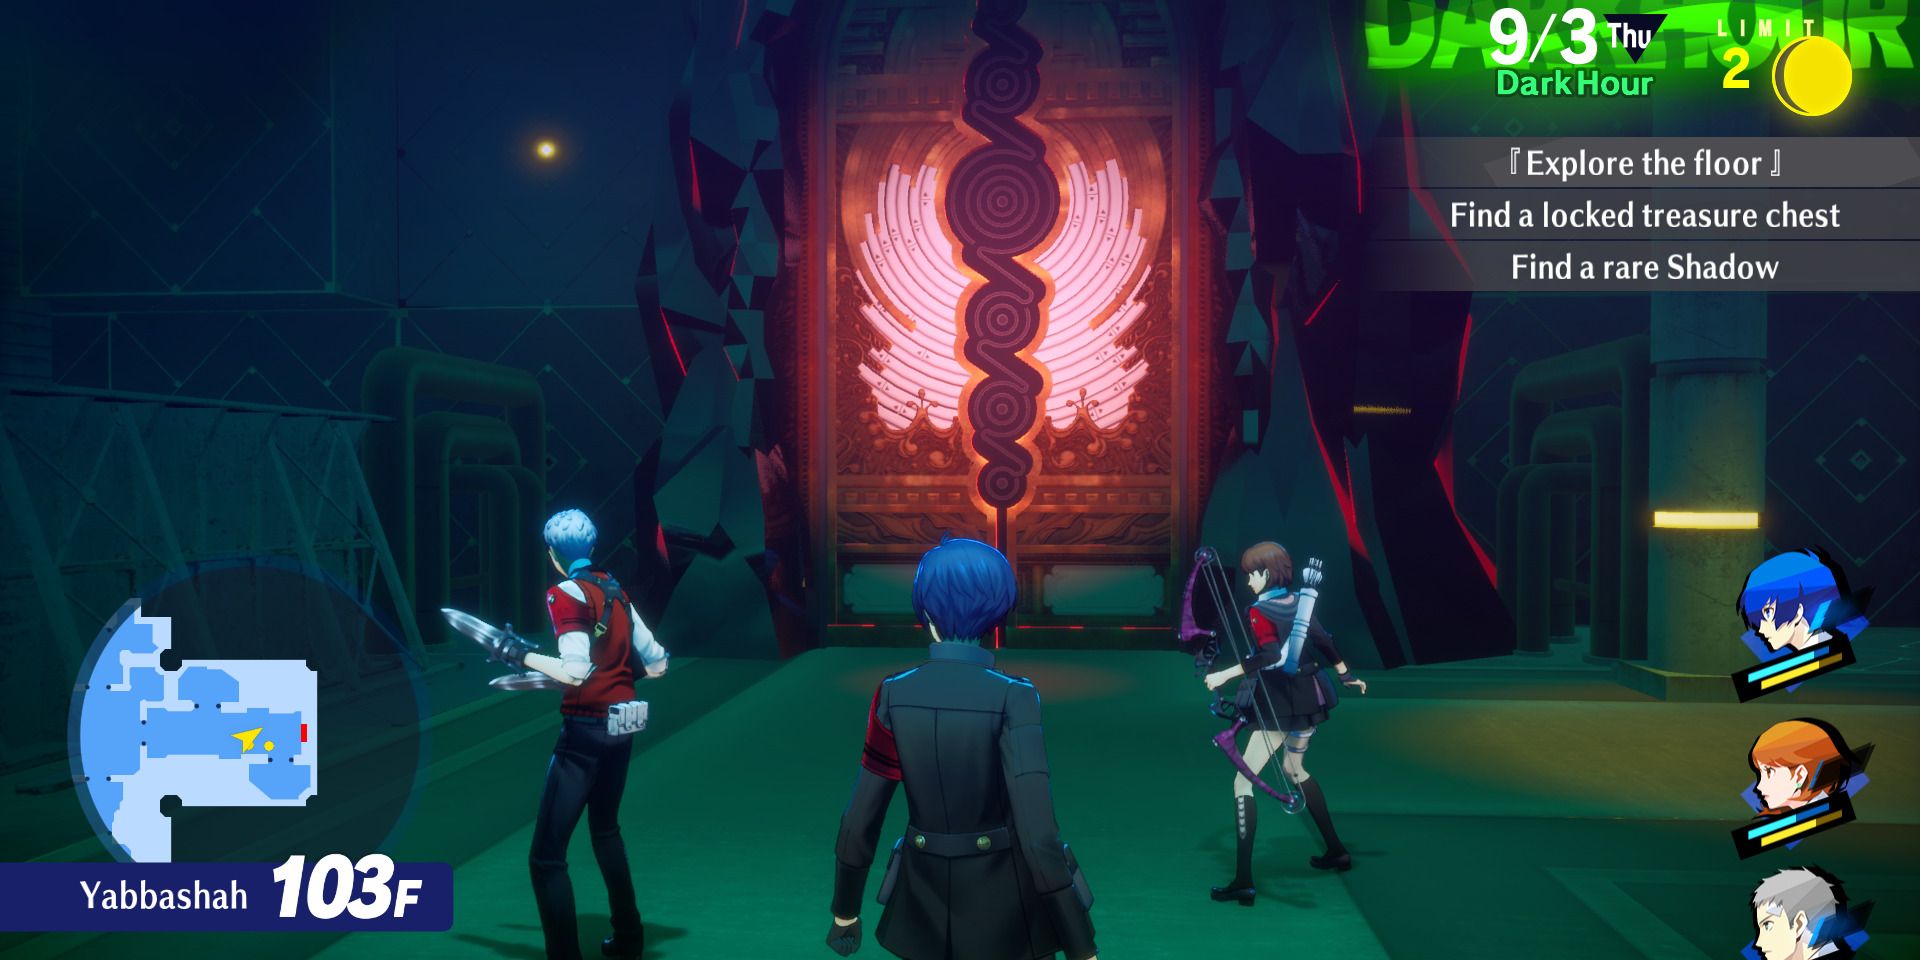 Image of the Monad Passage found on Floor 103 in the Yabbashah Block in Persona 3 Reload